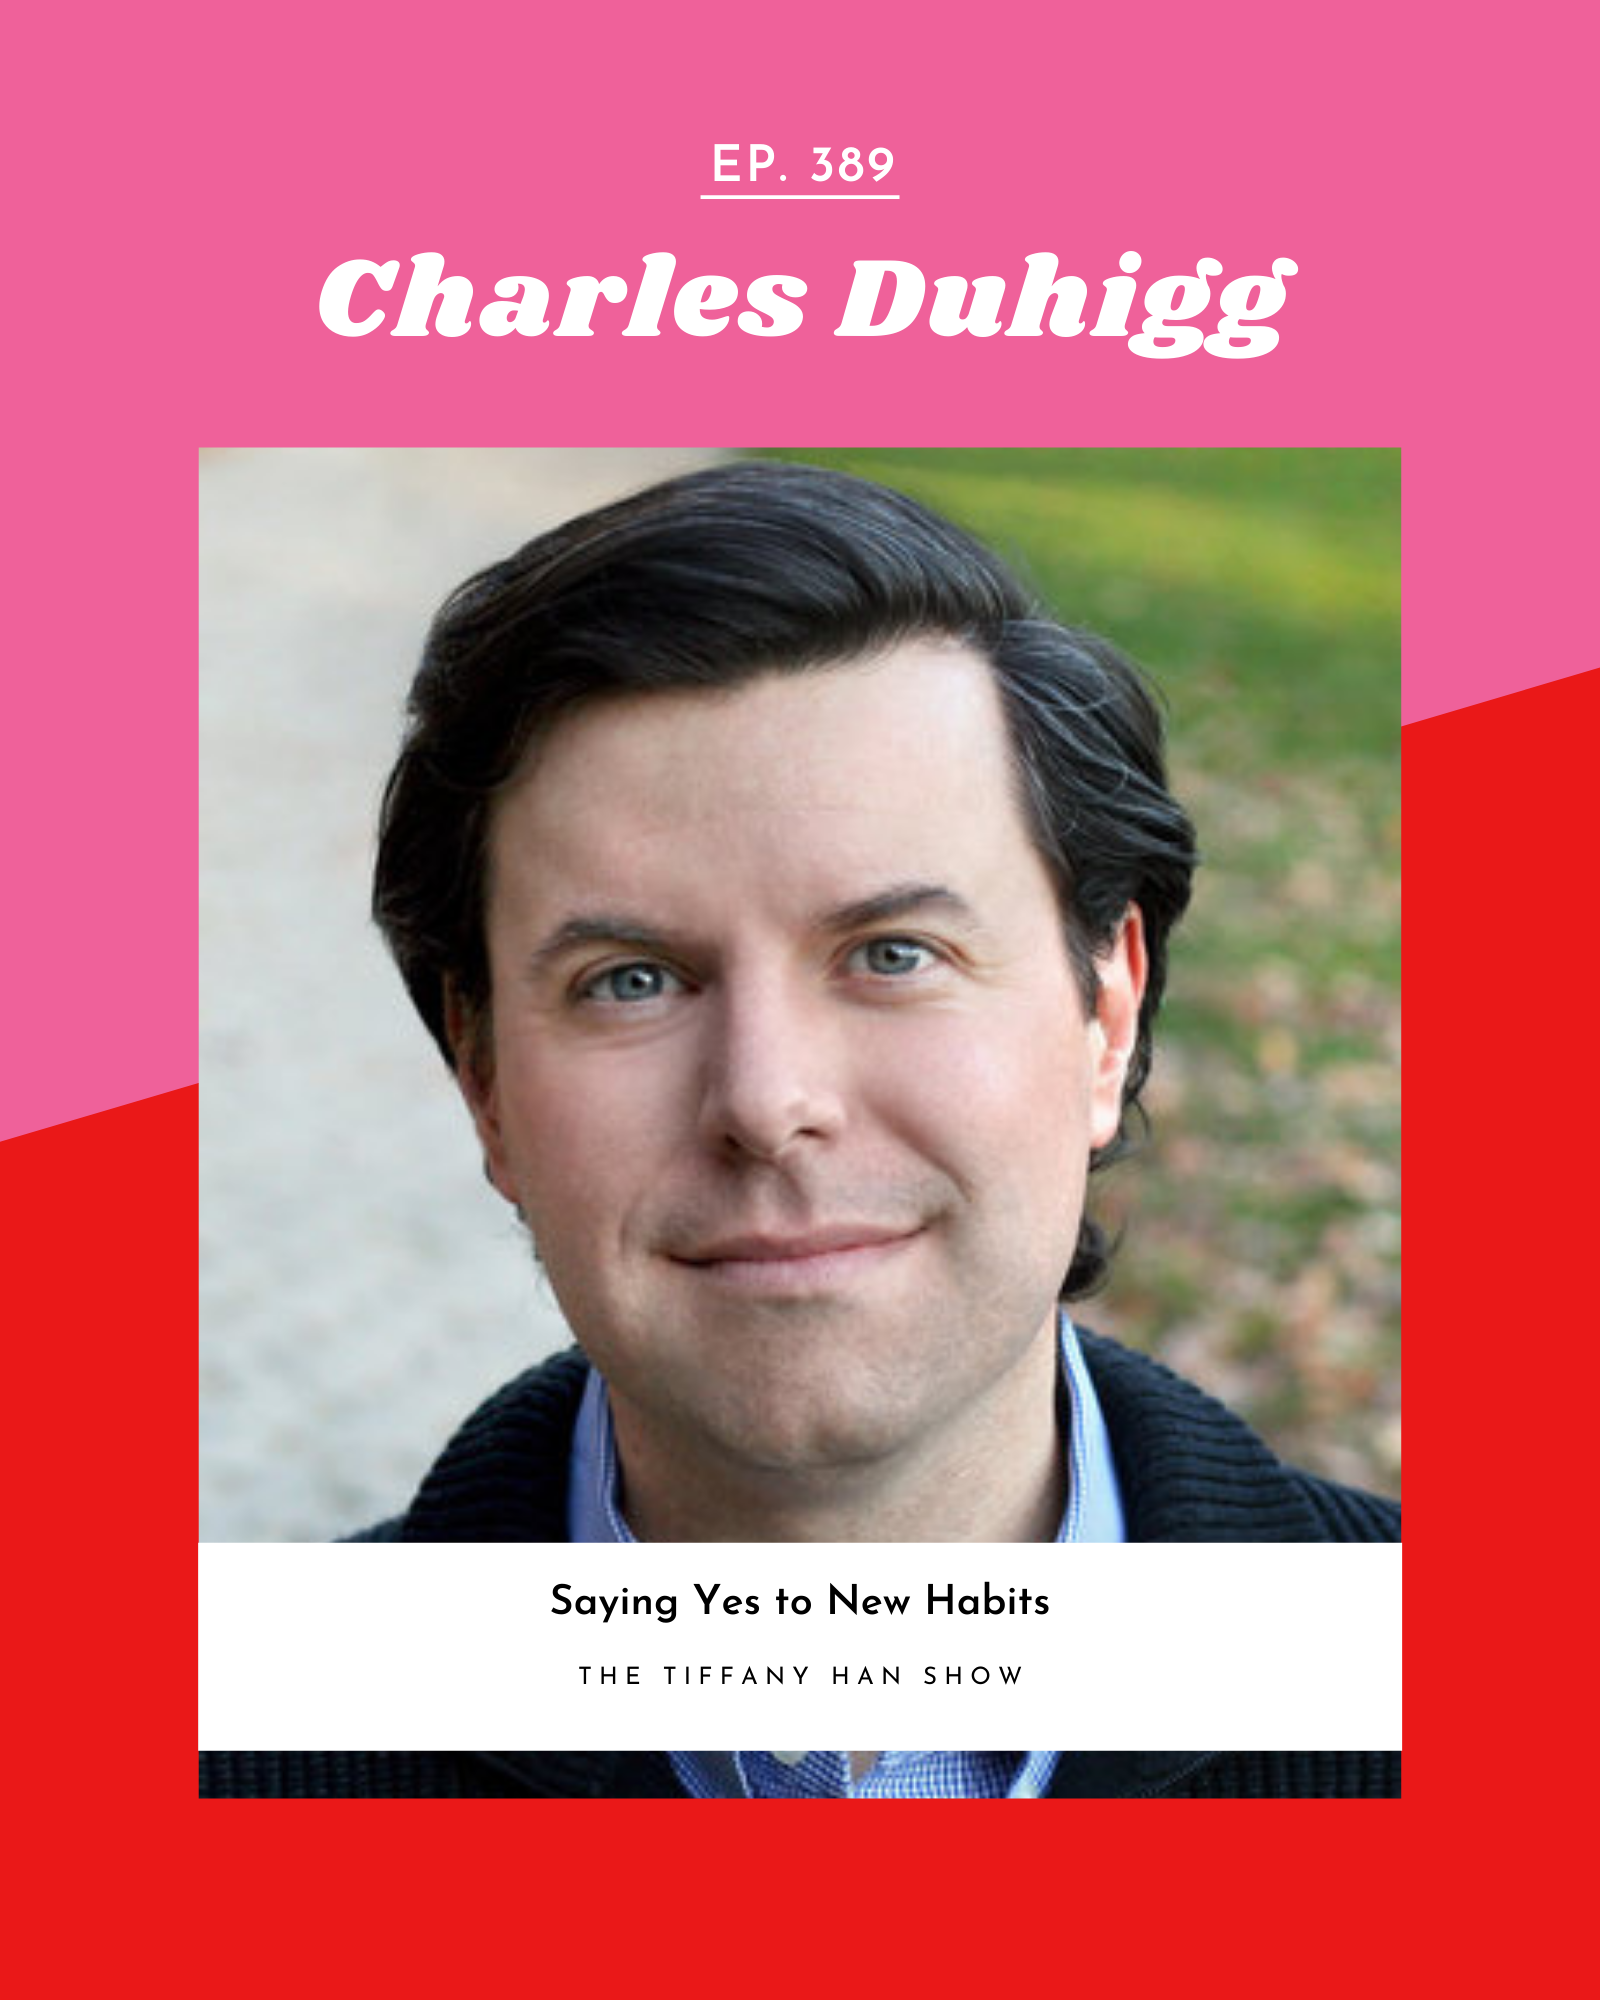 Saying Yes to New Habits with Charles Duhigg